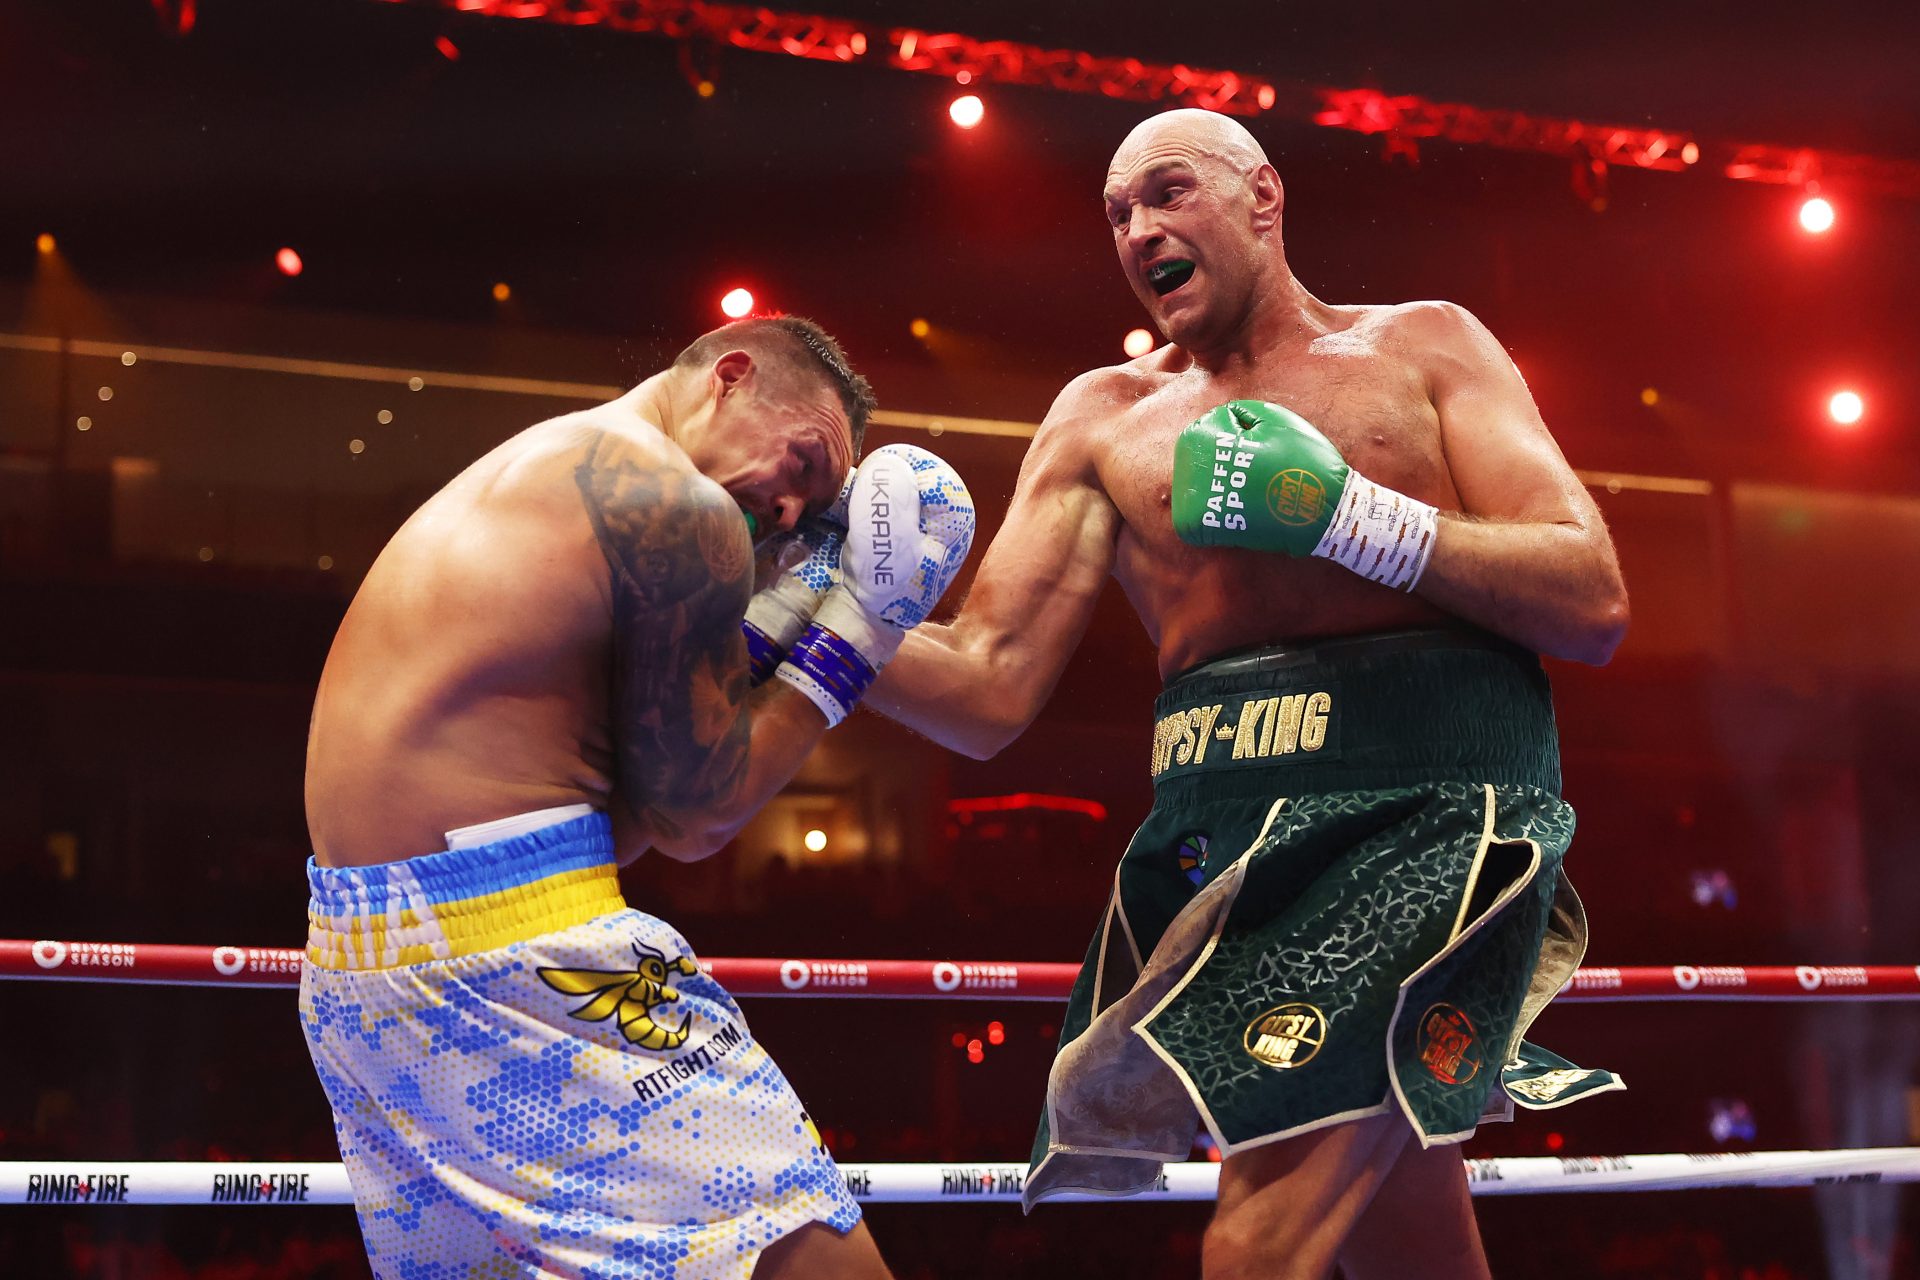 Rematch confirmed! Can Tyson Fury recapture his world heavyweight title?